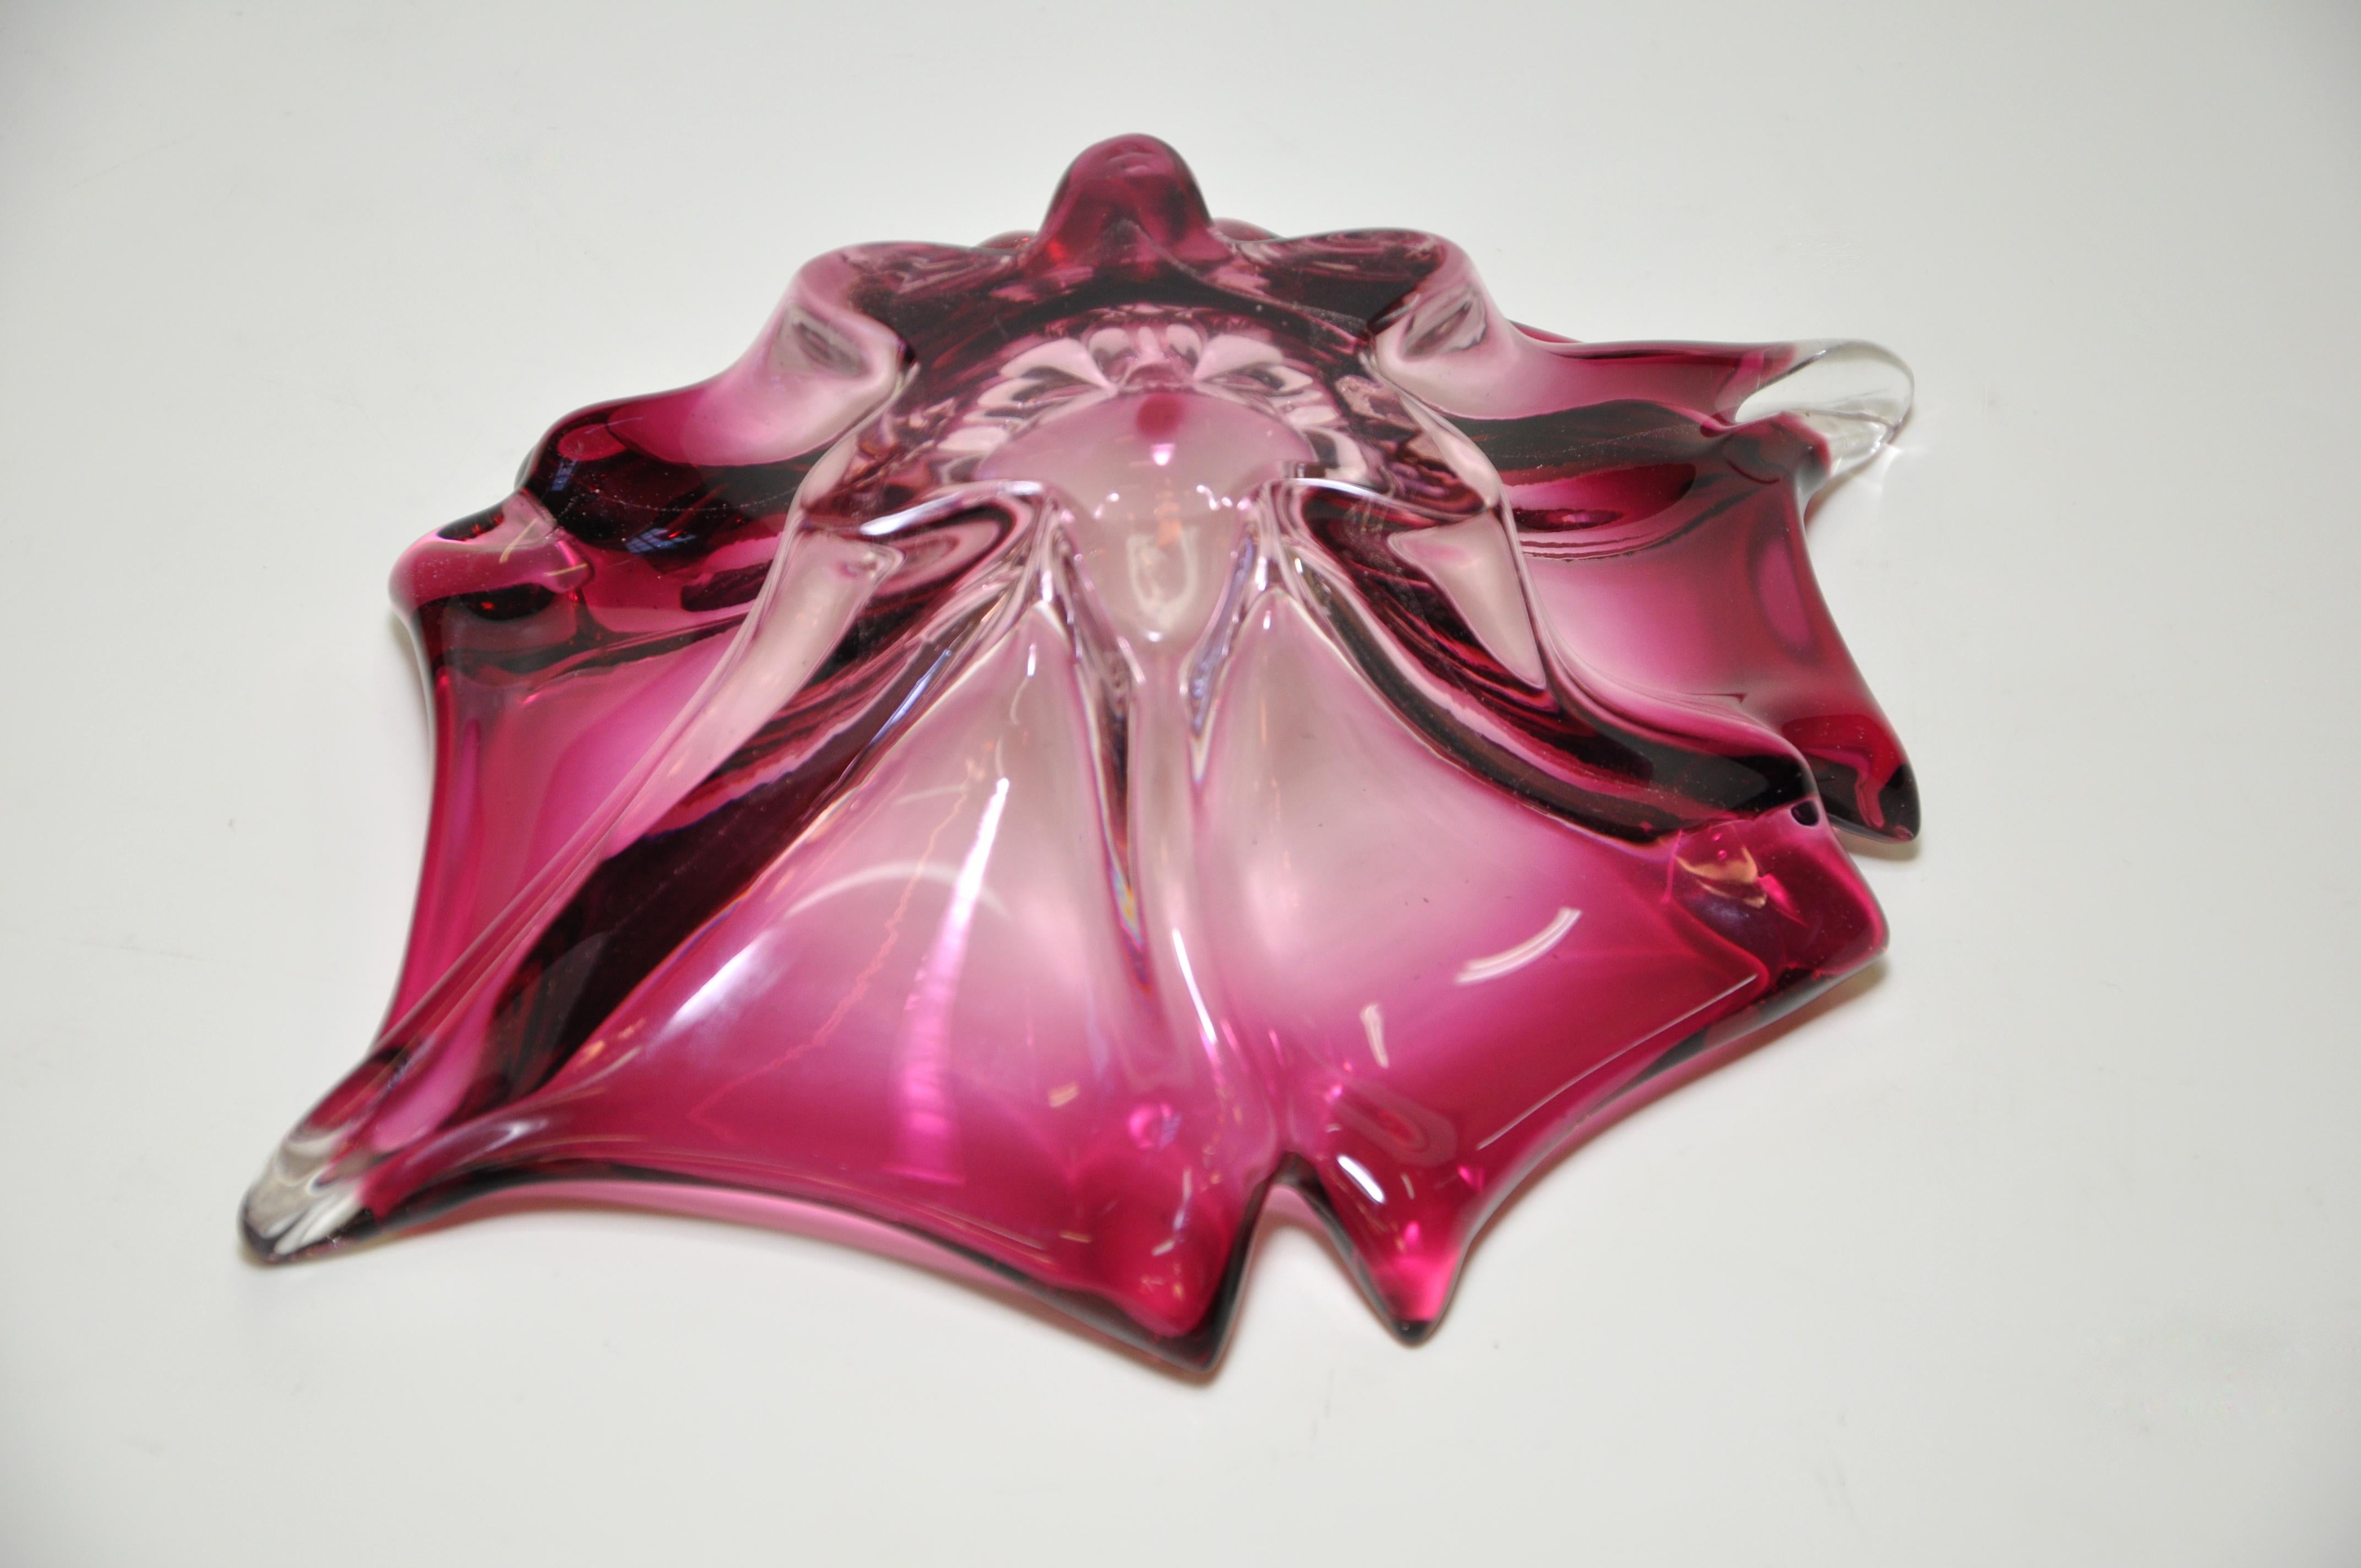 Stunning Vintage Pink Art Glass Bowl Italian Murano In Excellent Condition For Sale In Great Britain, Northern Ireland